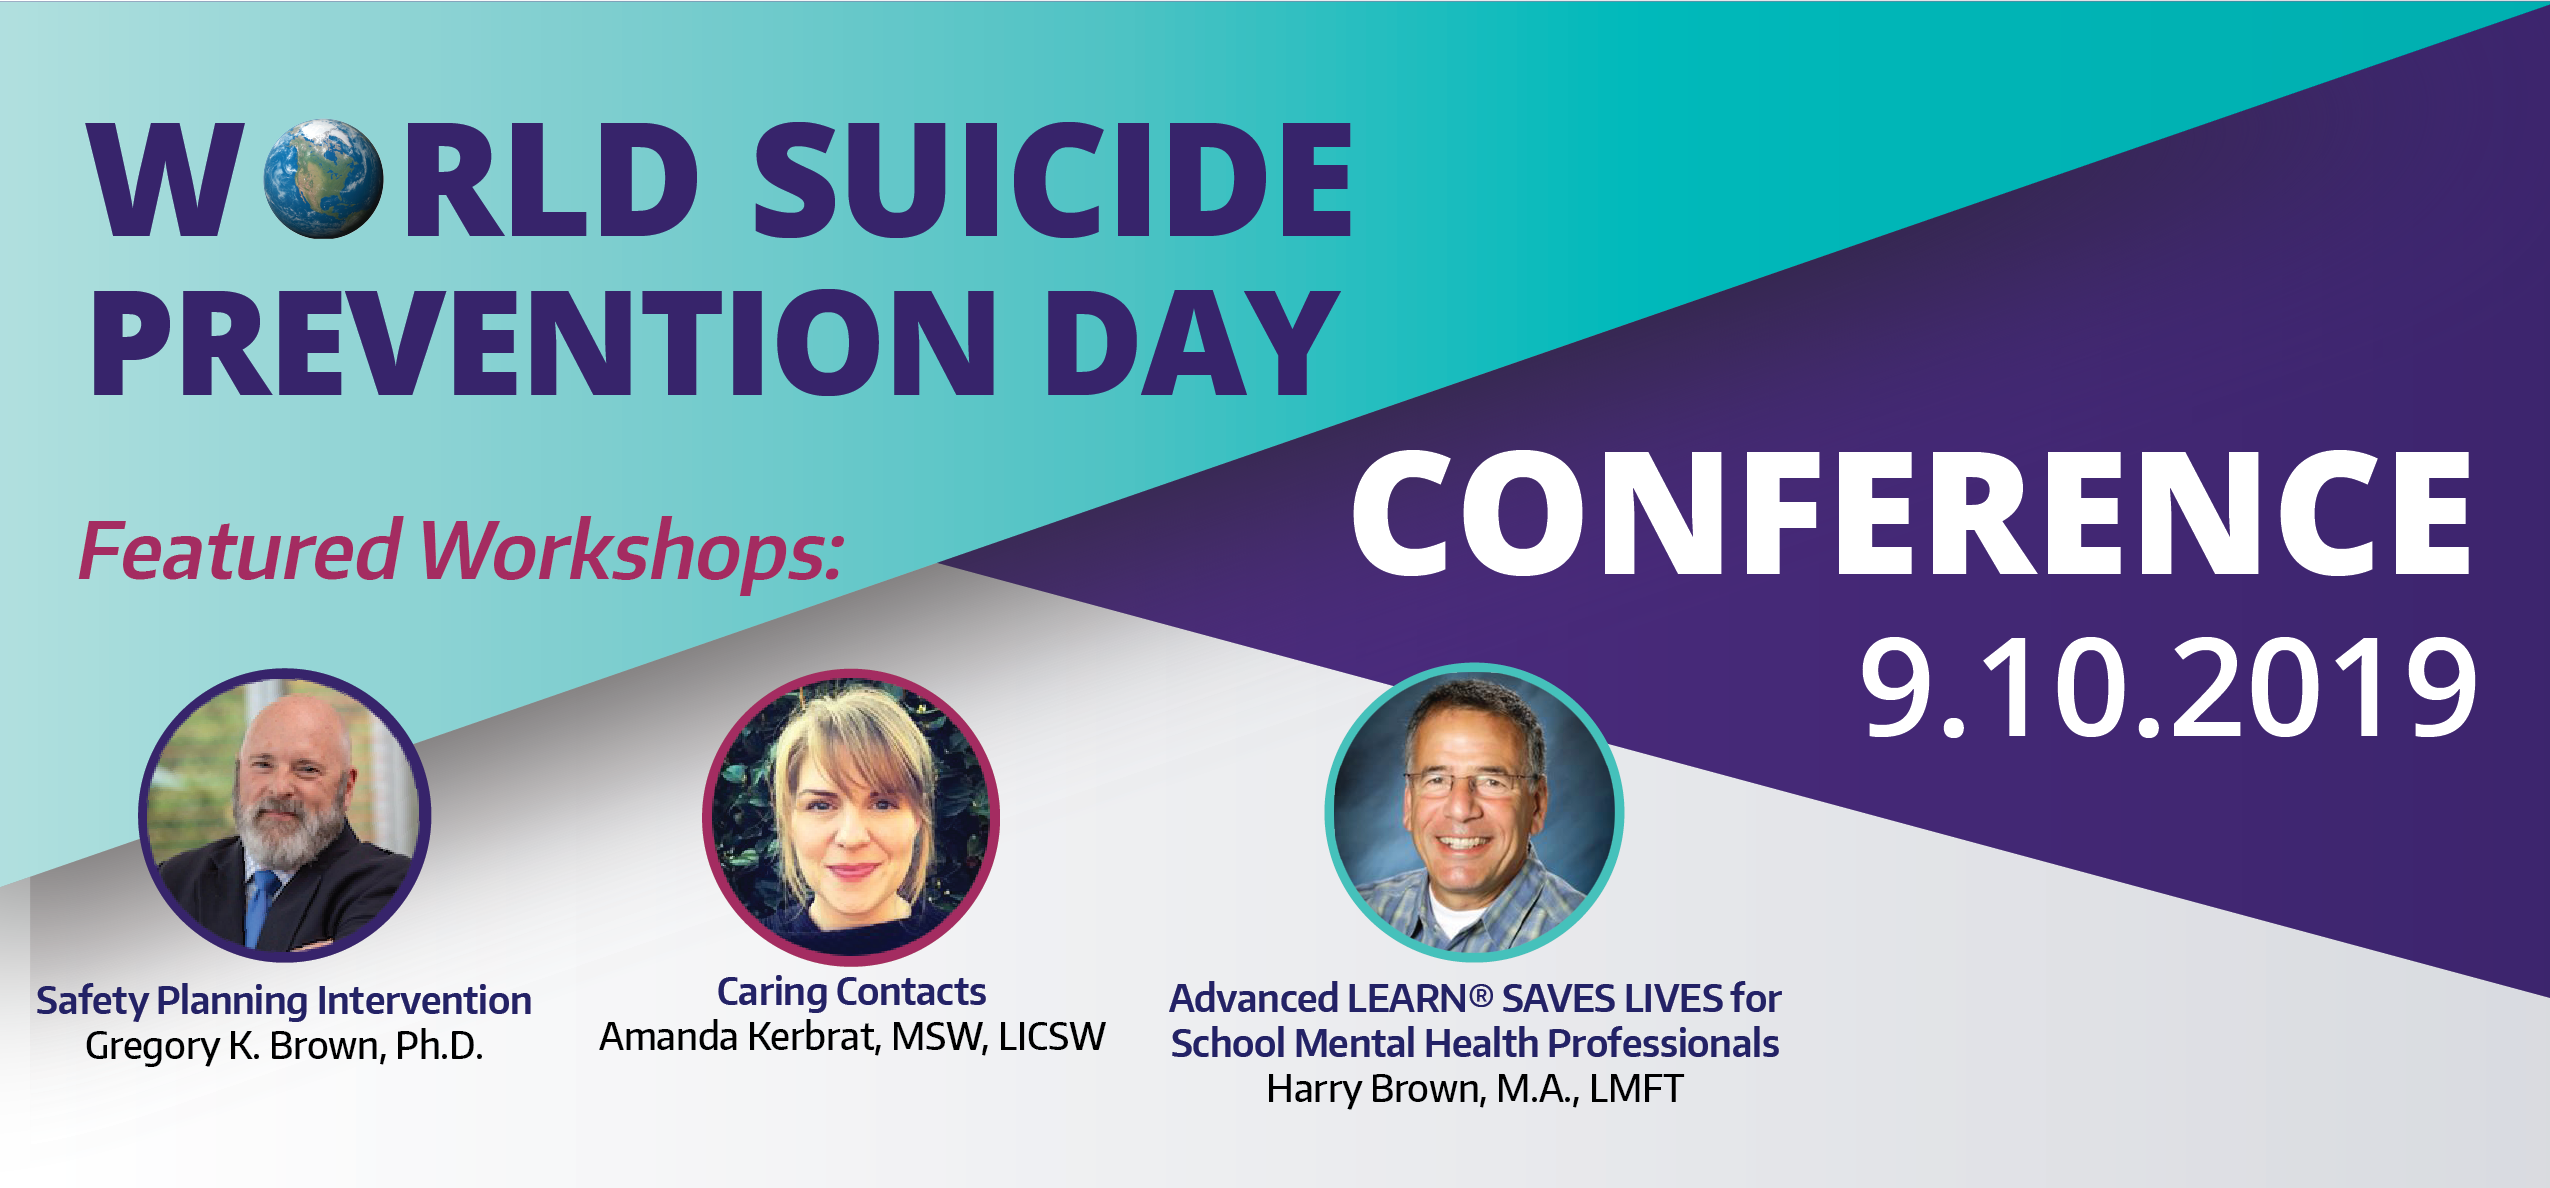 World Suicide Prevention Conference Forefront Suicide Prevention